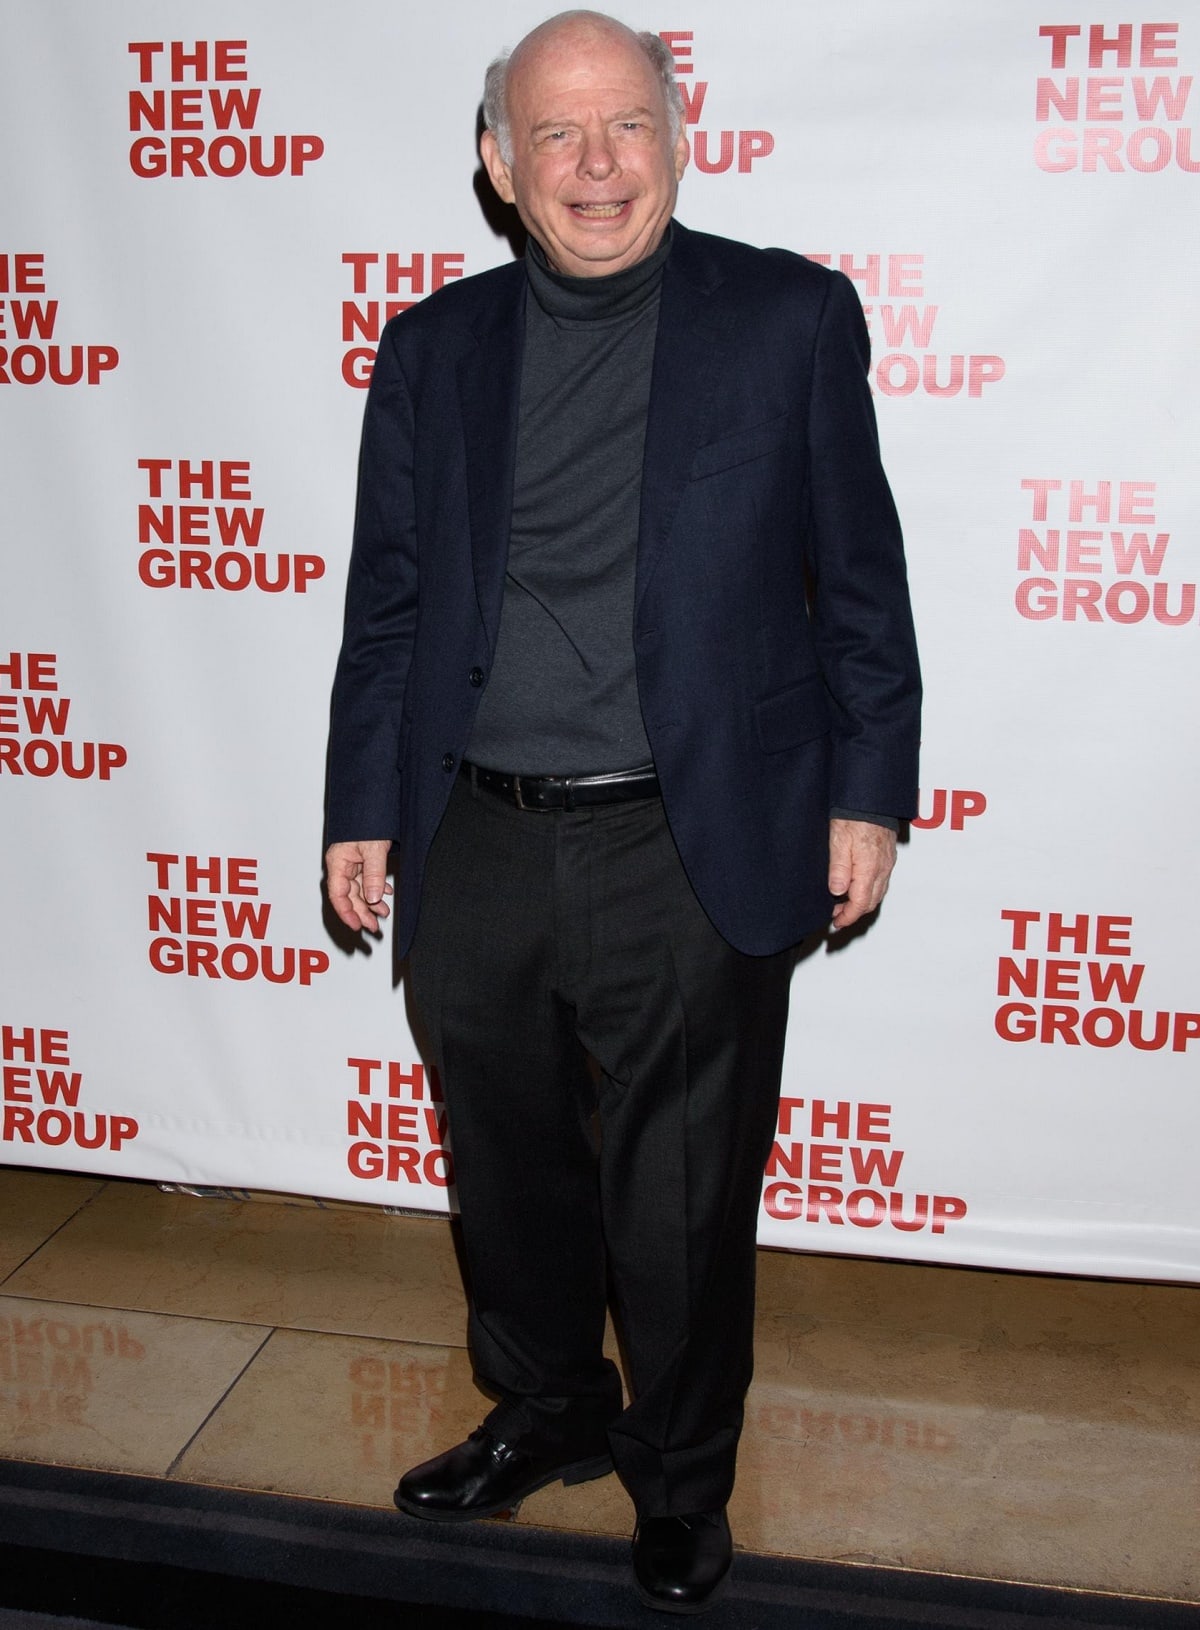 Wallace Shawn has a height of 5 feet and 2 inches, and he has an impressive $8 million net worth